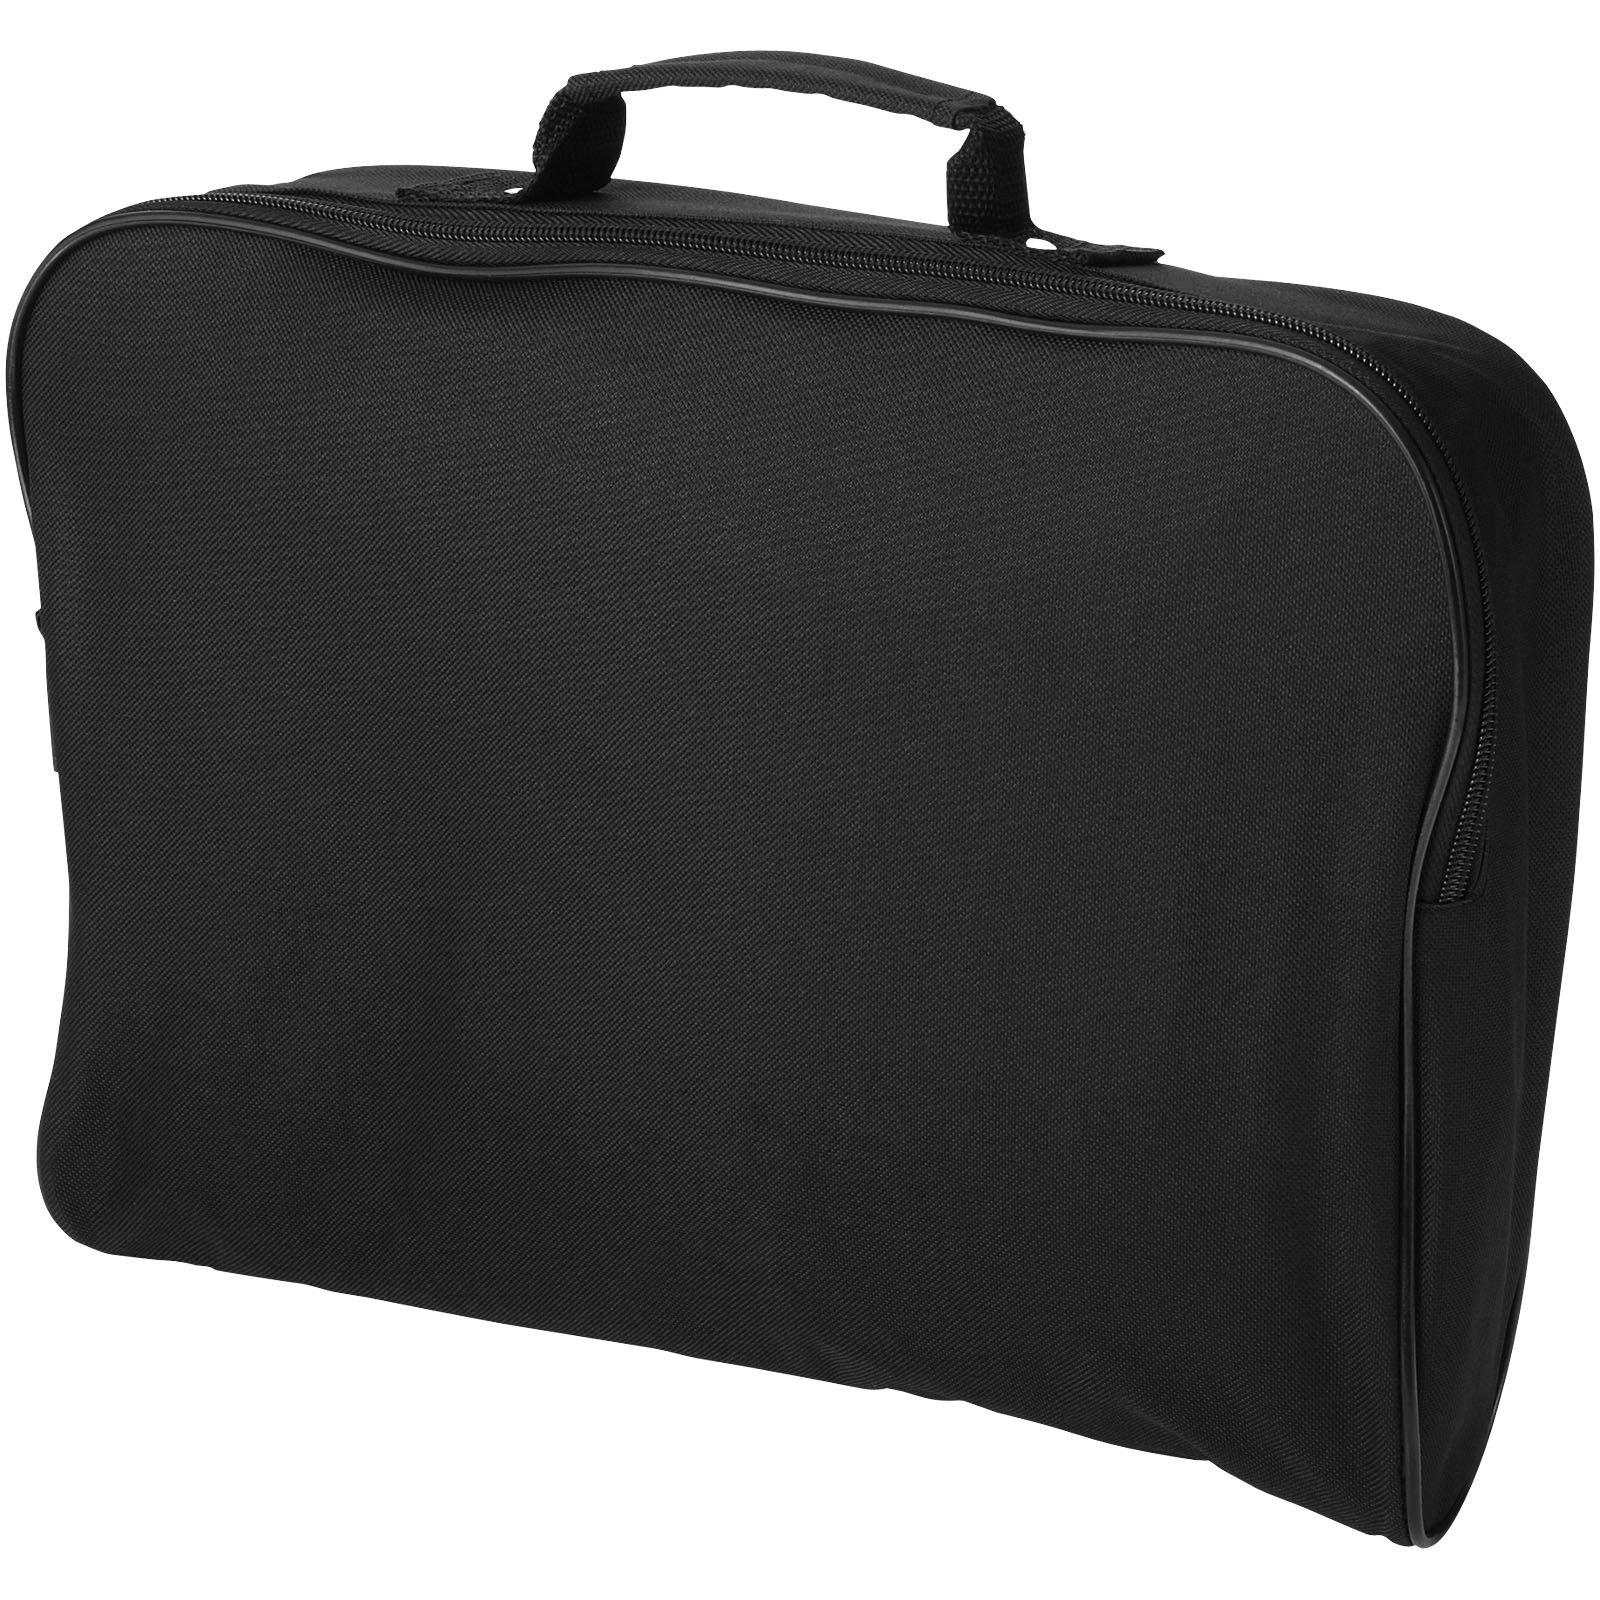 Advertising Conference bags - Florida conference bag 7L - 0